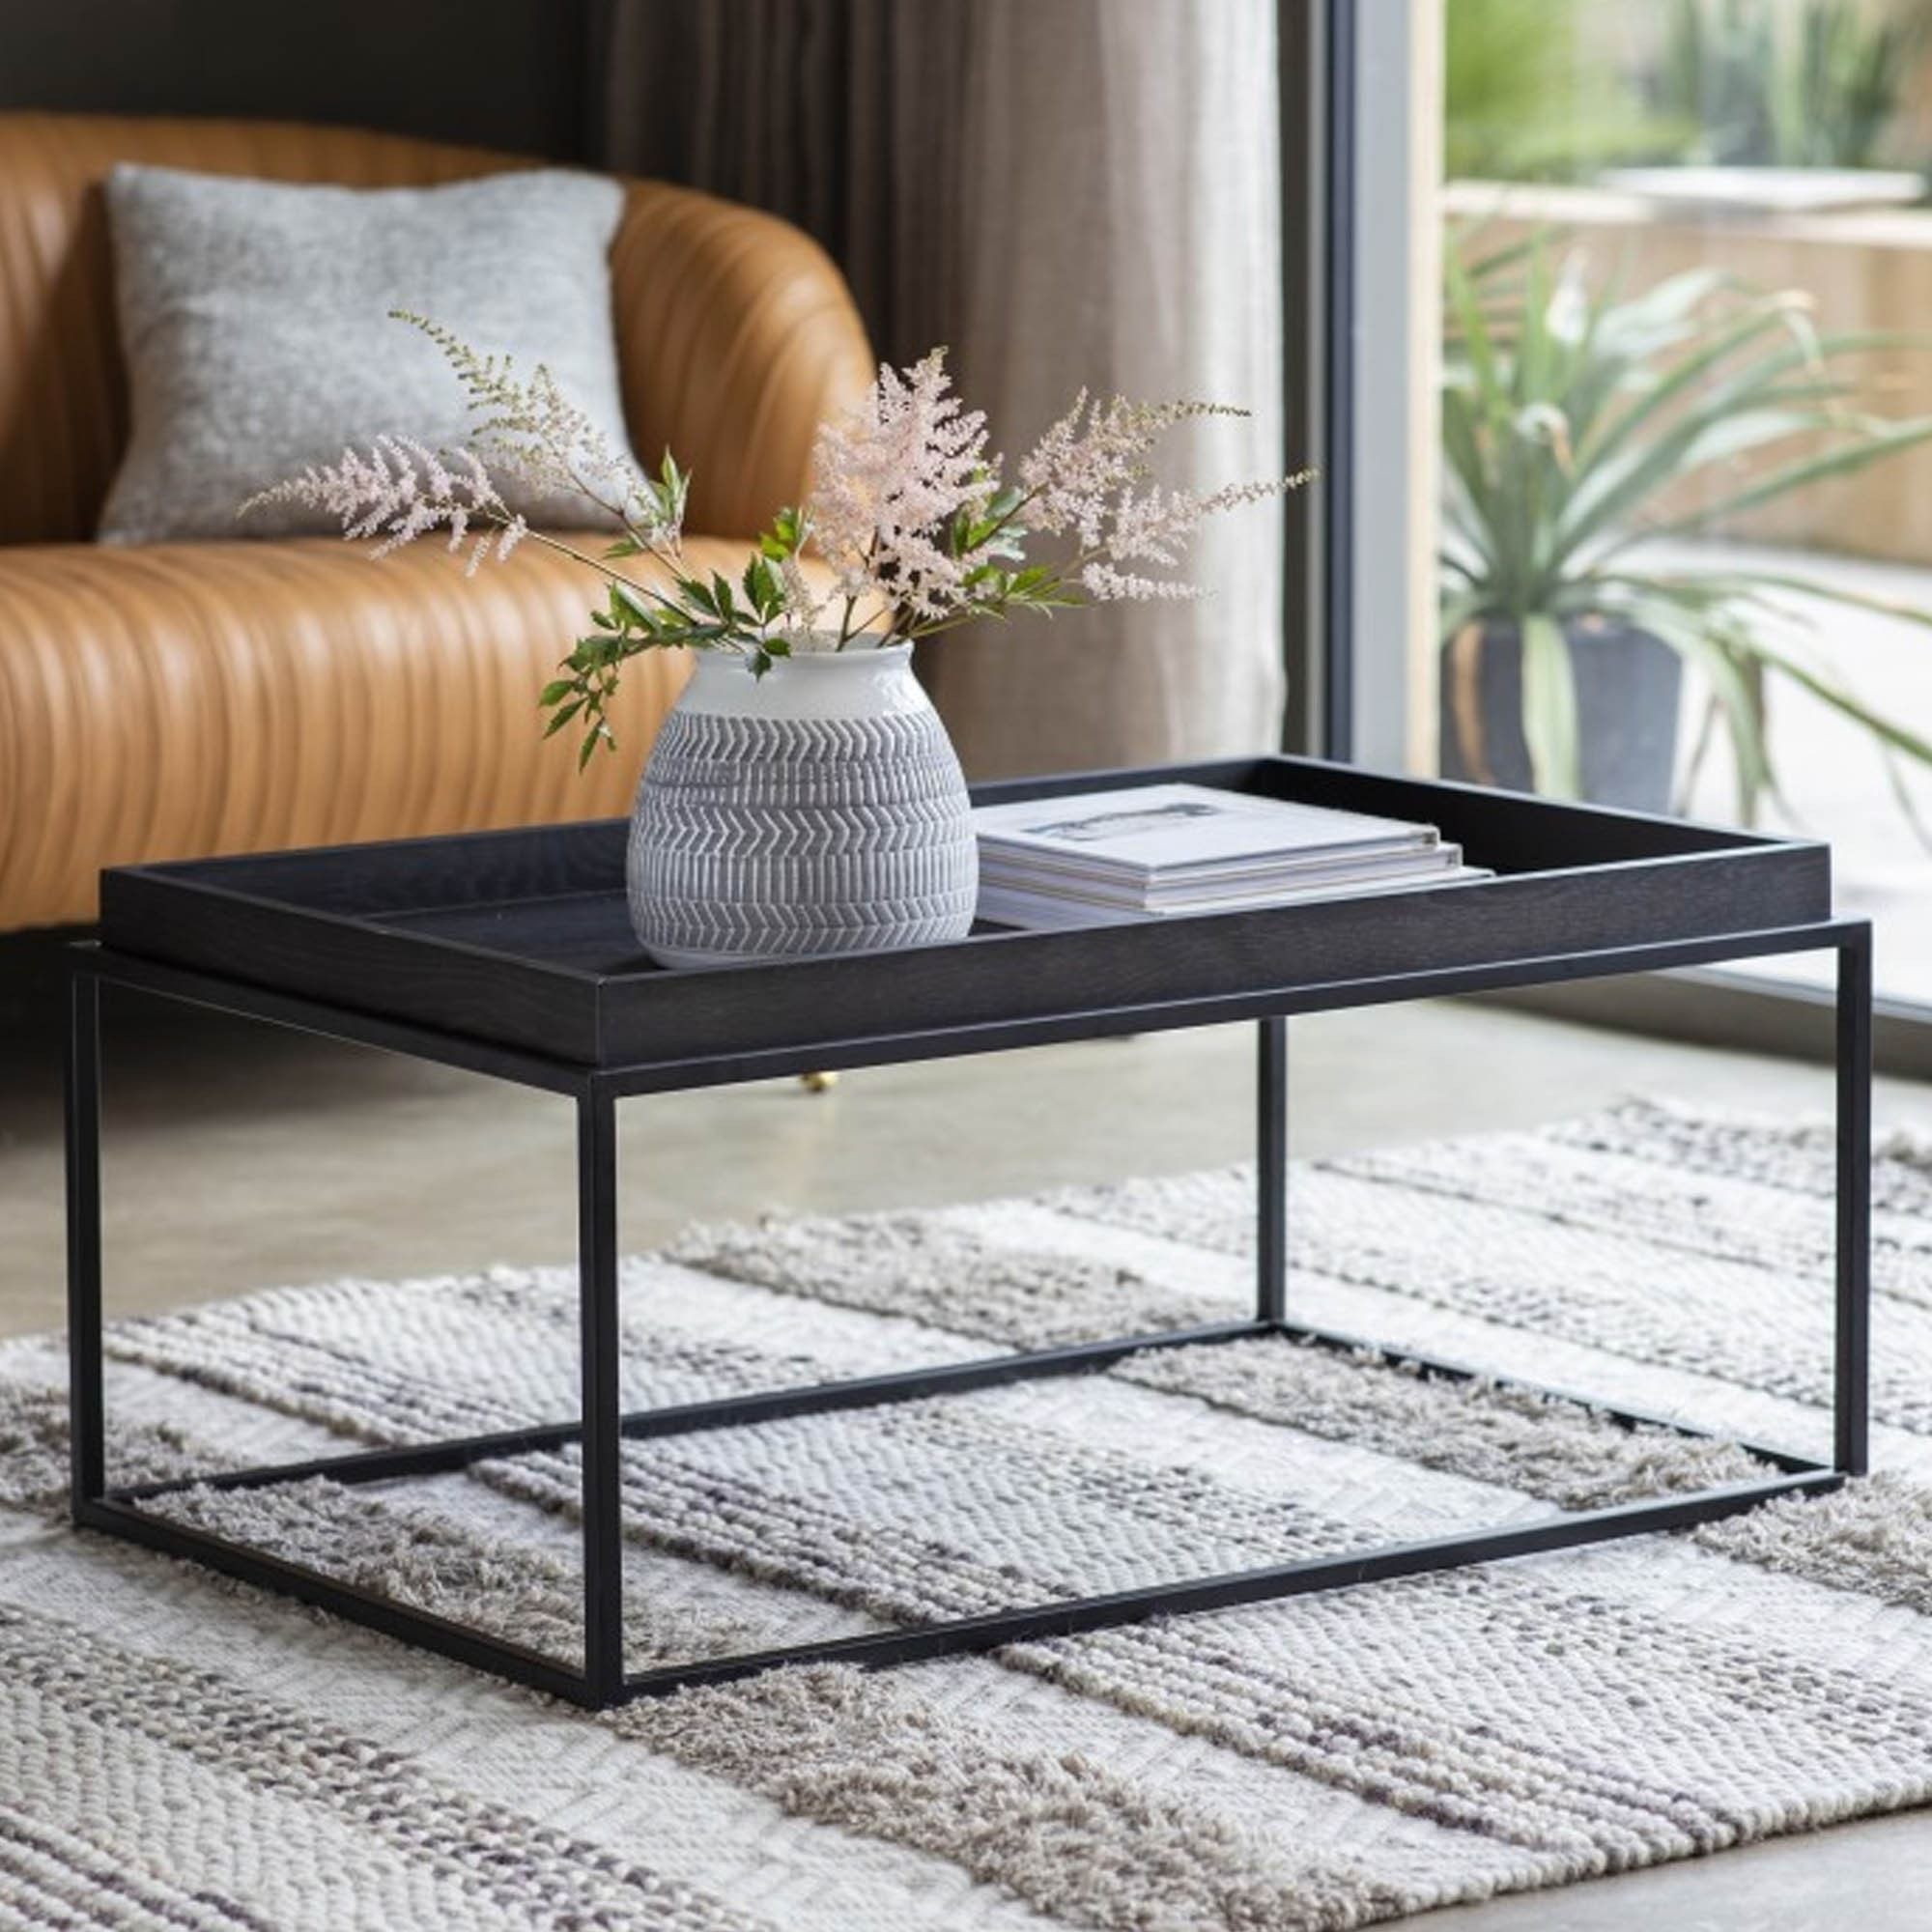 Forden Tray Coffee Table Black (View 7 of 20)